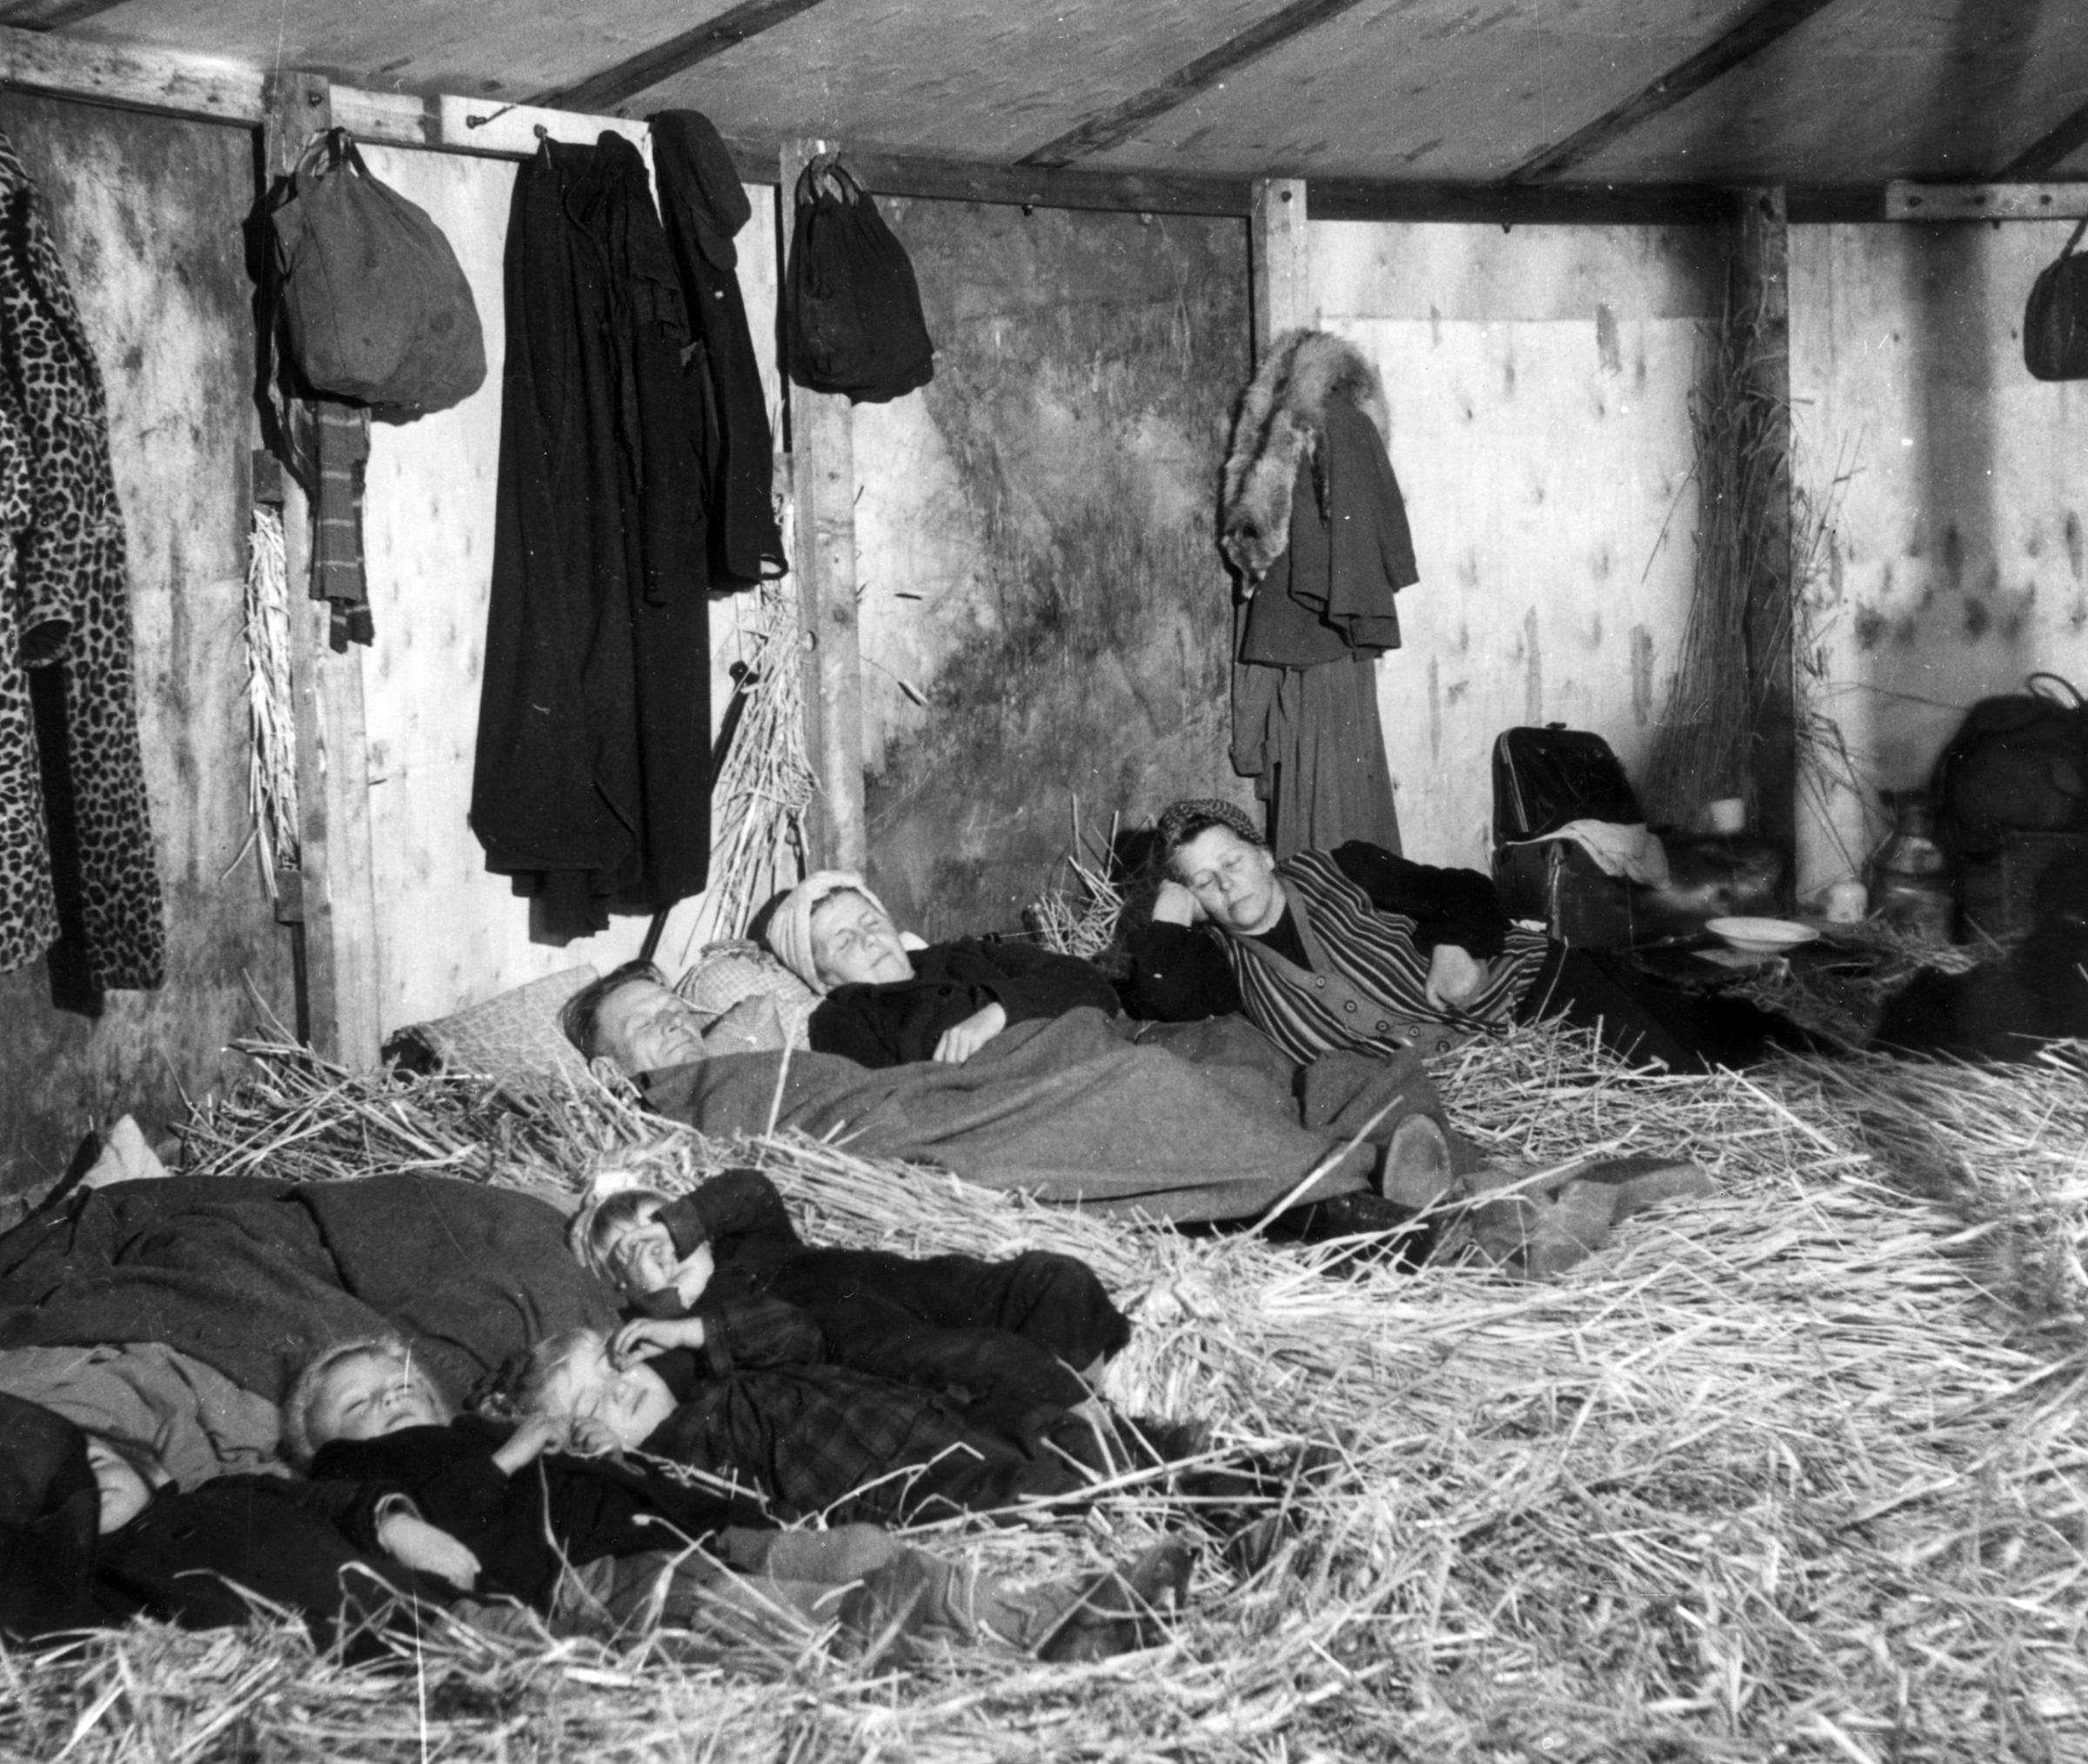 25th October 1945: German refugees fleeing from the Russian zone in the first few weeks after the end of World War II in Europe. They are sleeping on straw in a makeshift transit camp at Uelzen in the British zone of Germany.